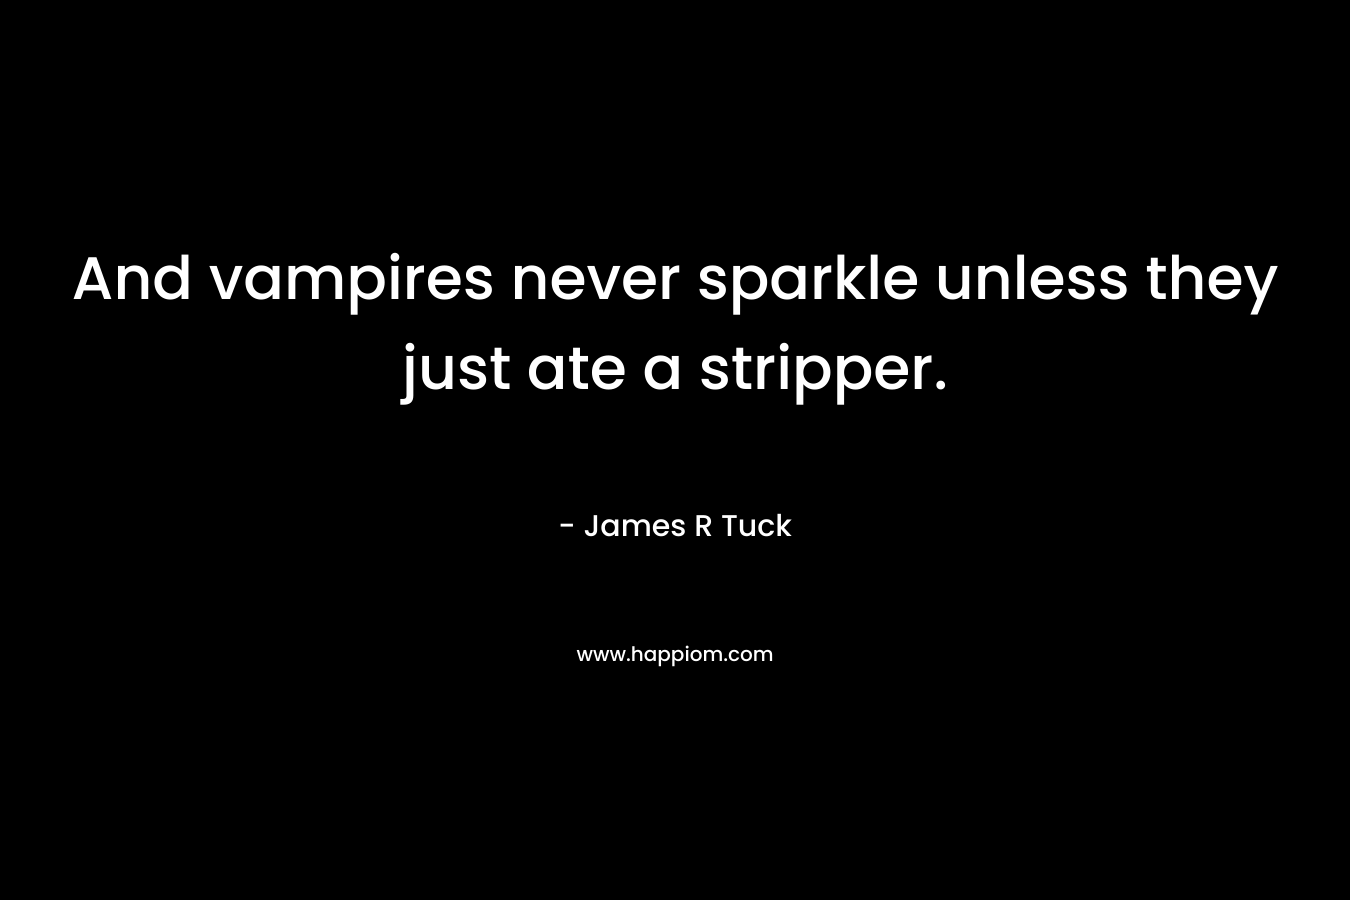 And vampires never sparkle unless they just ate a stripper. – James R Tuck